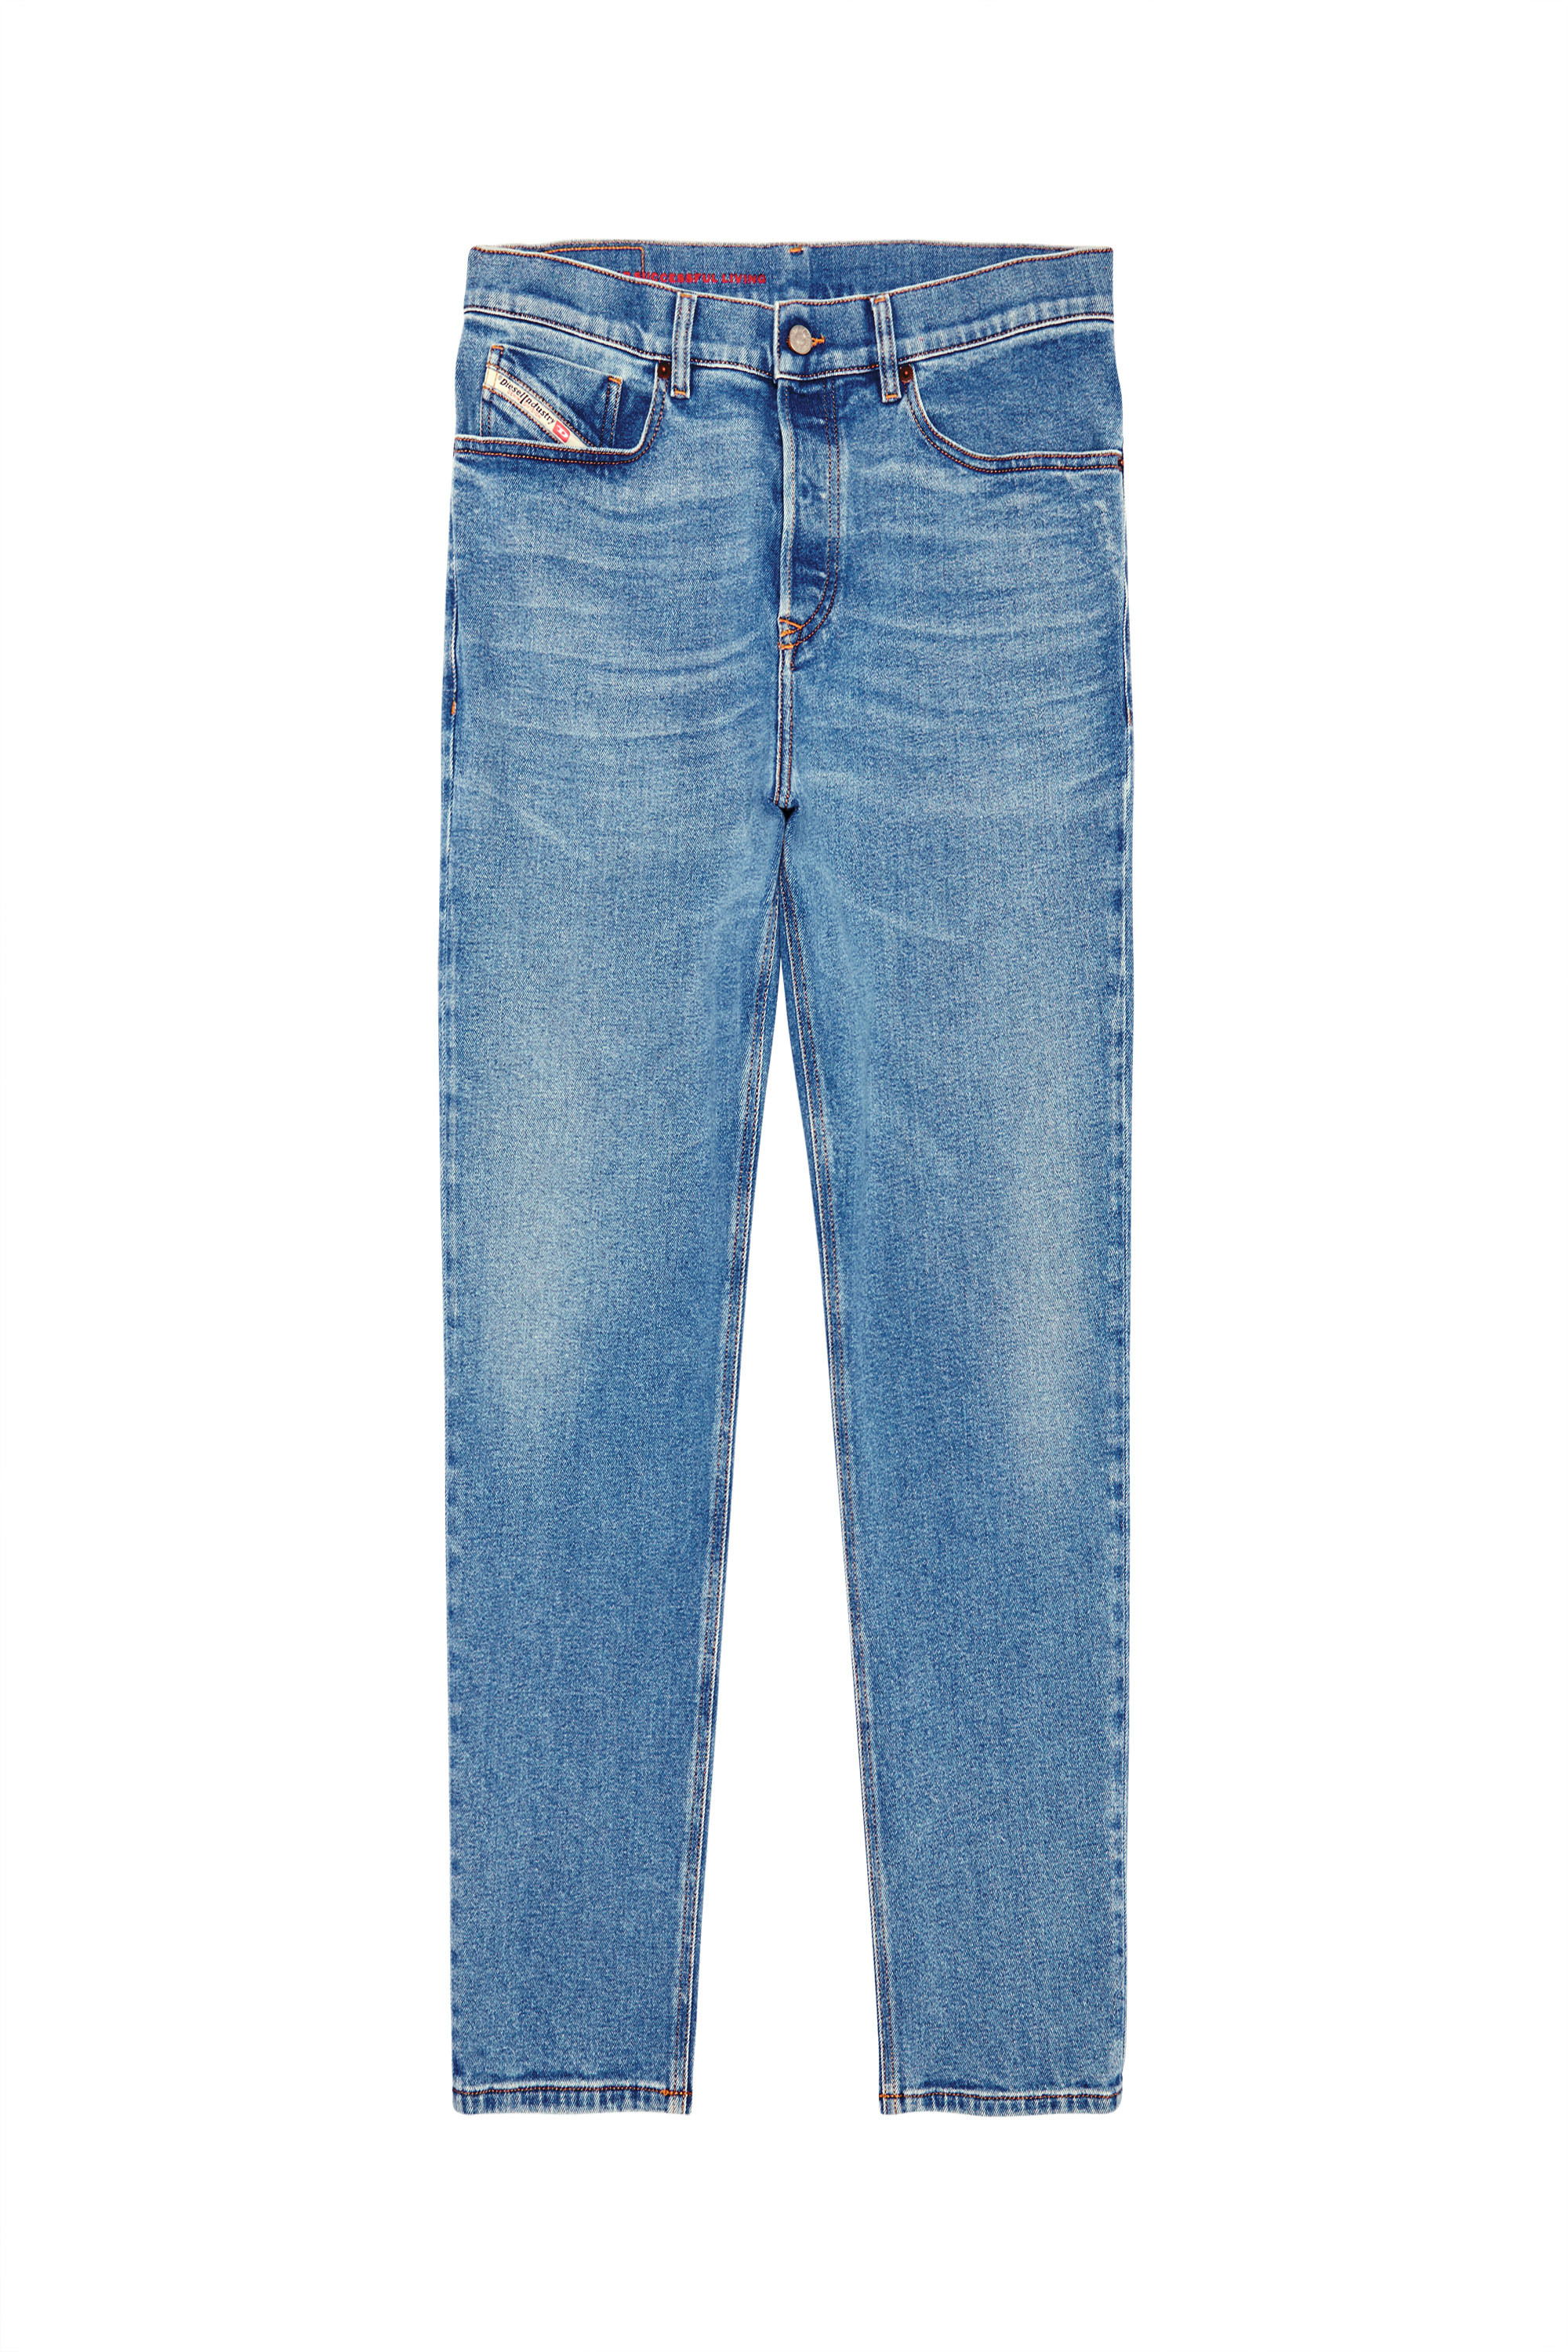 2005 D-FINING 09B92 Tapered Jeans, Hellblau - Jeans